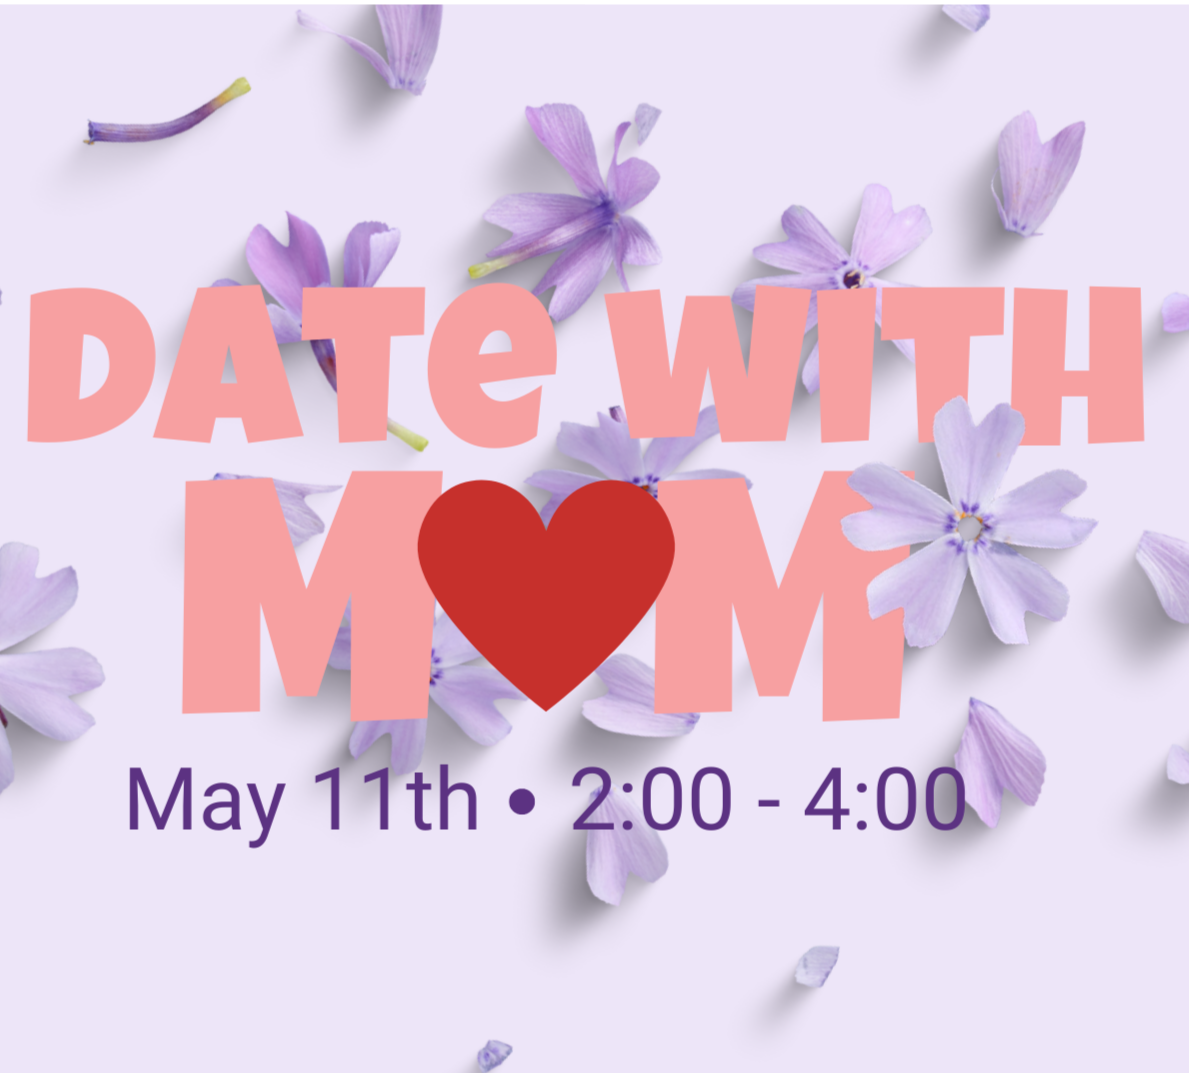 A Date with Mom - May 11th - 2:00pm - 4:00pm